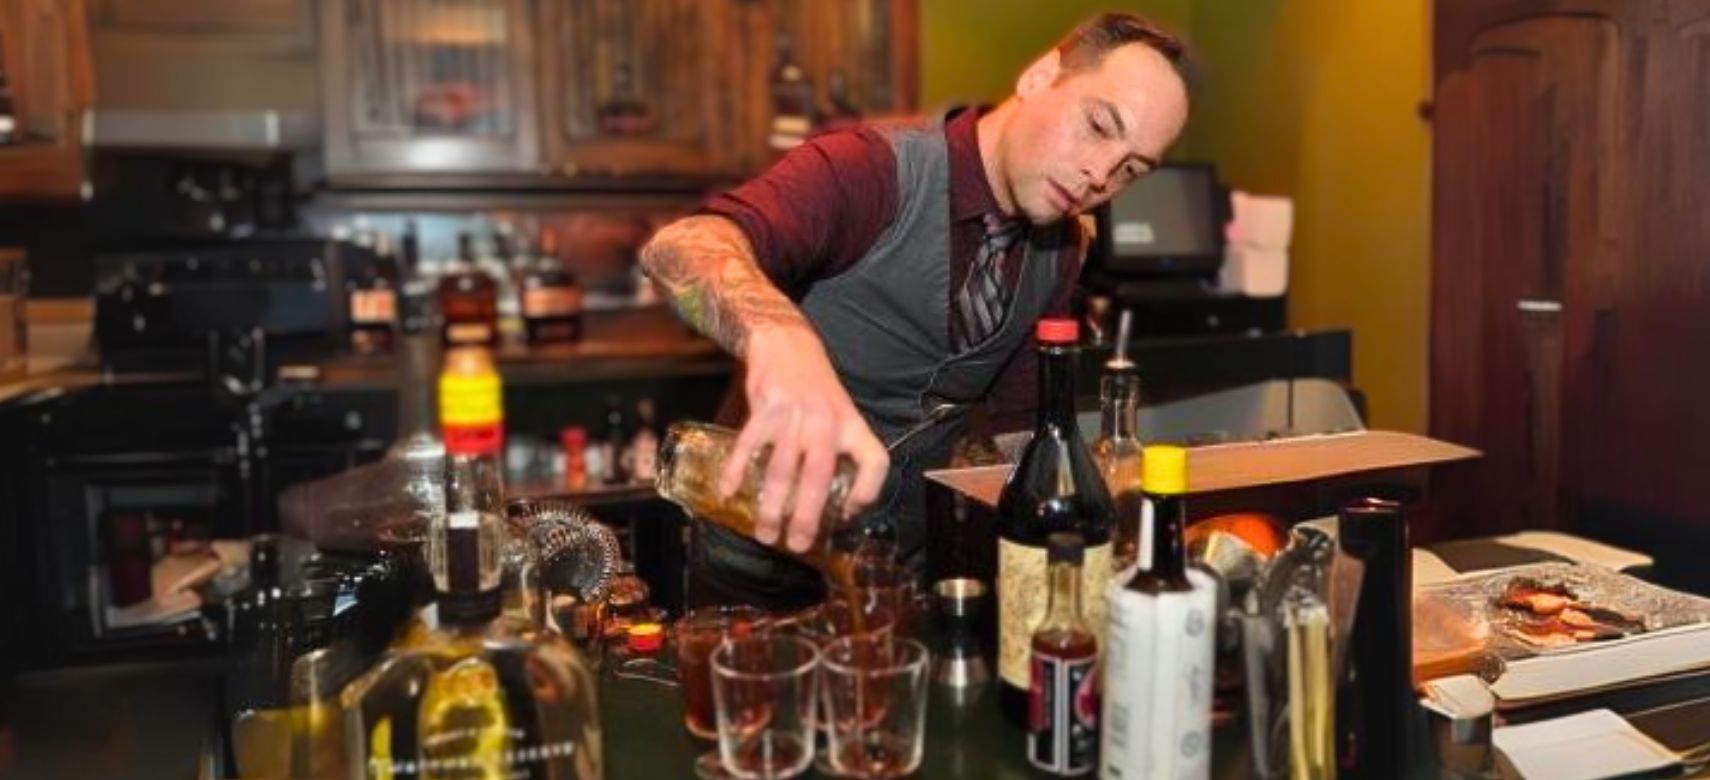 Photo for: Know Your Bartenders: Michael Dziedzic